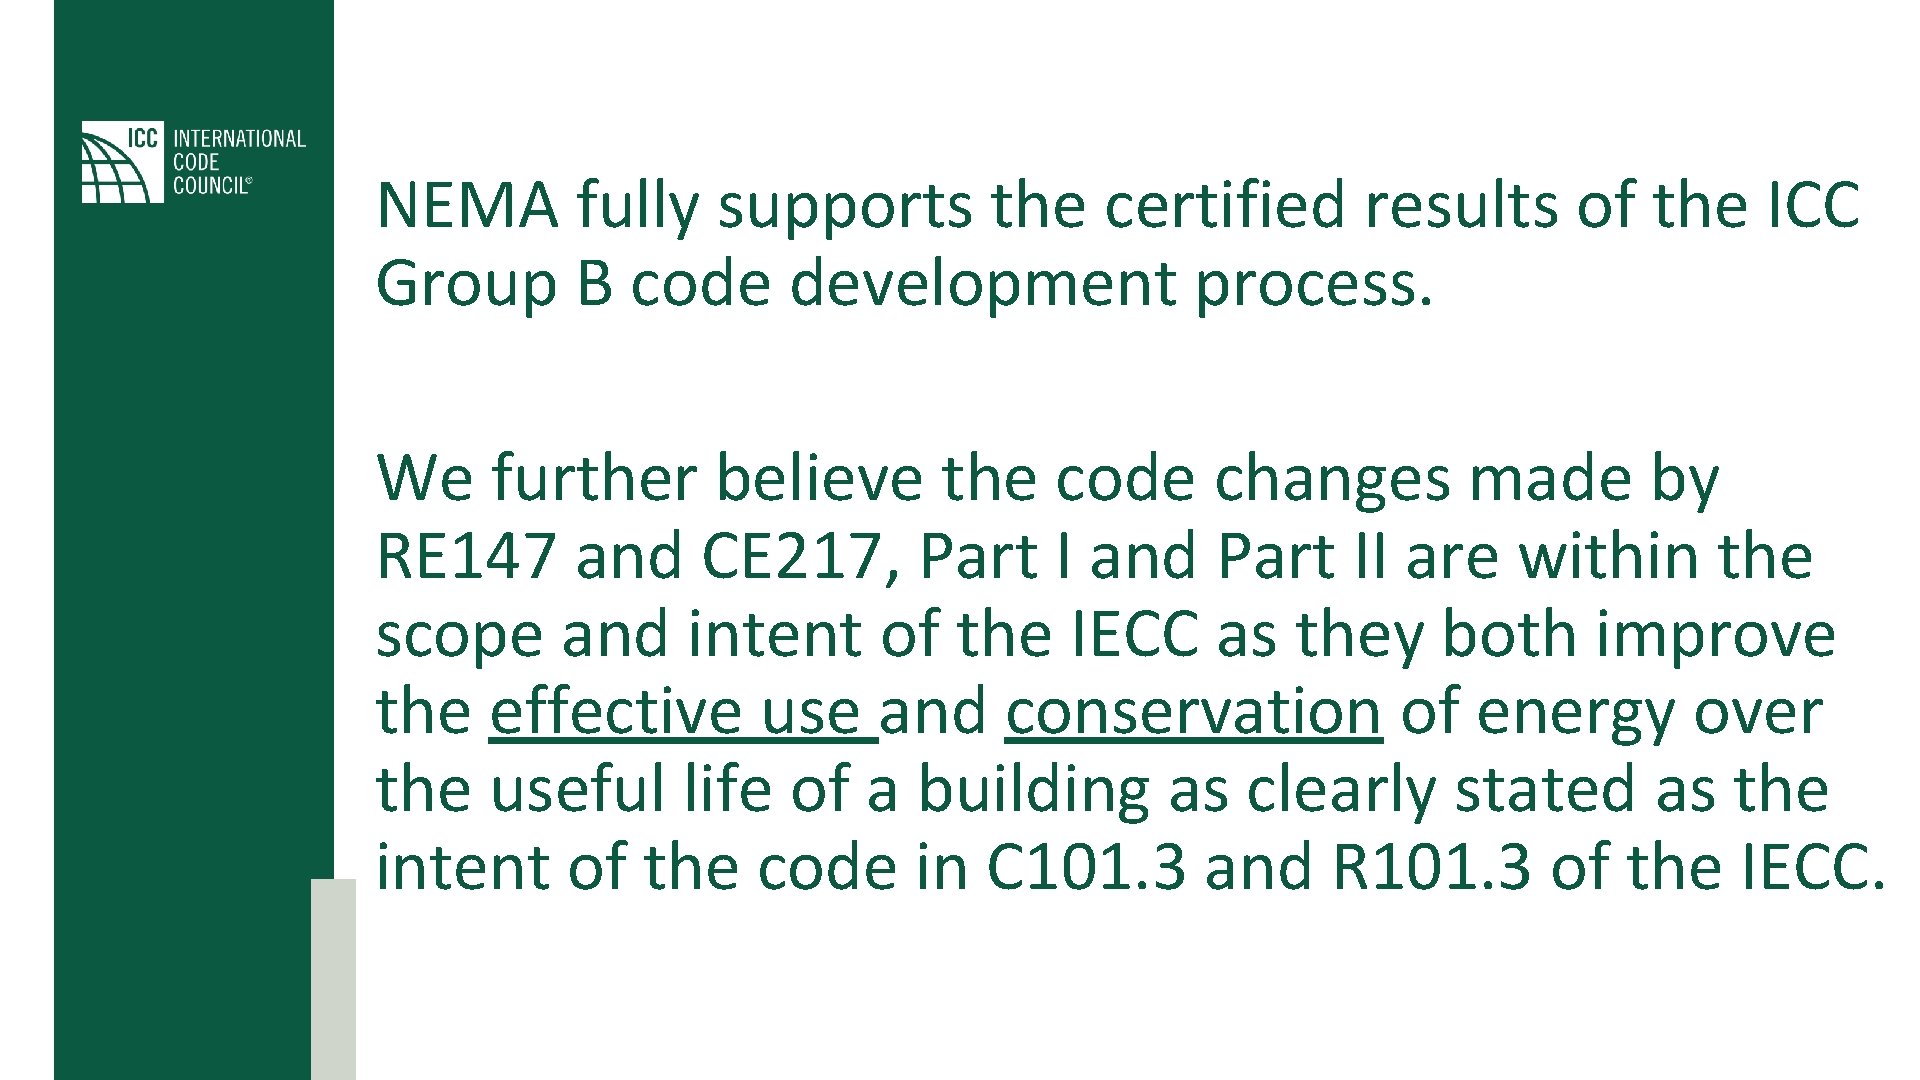 NEMA fully supports the certified results of the ICC Group B code development process.